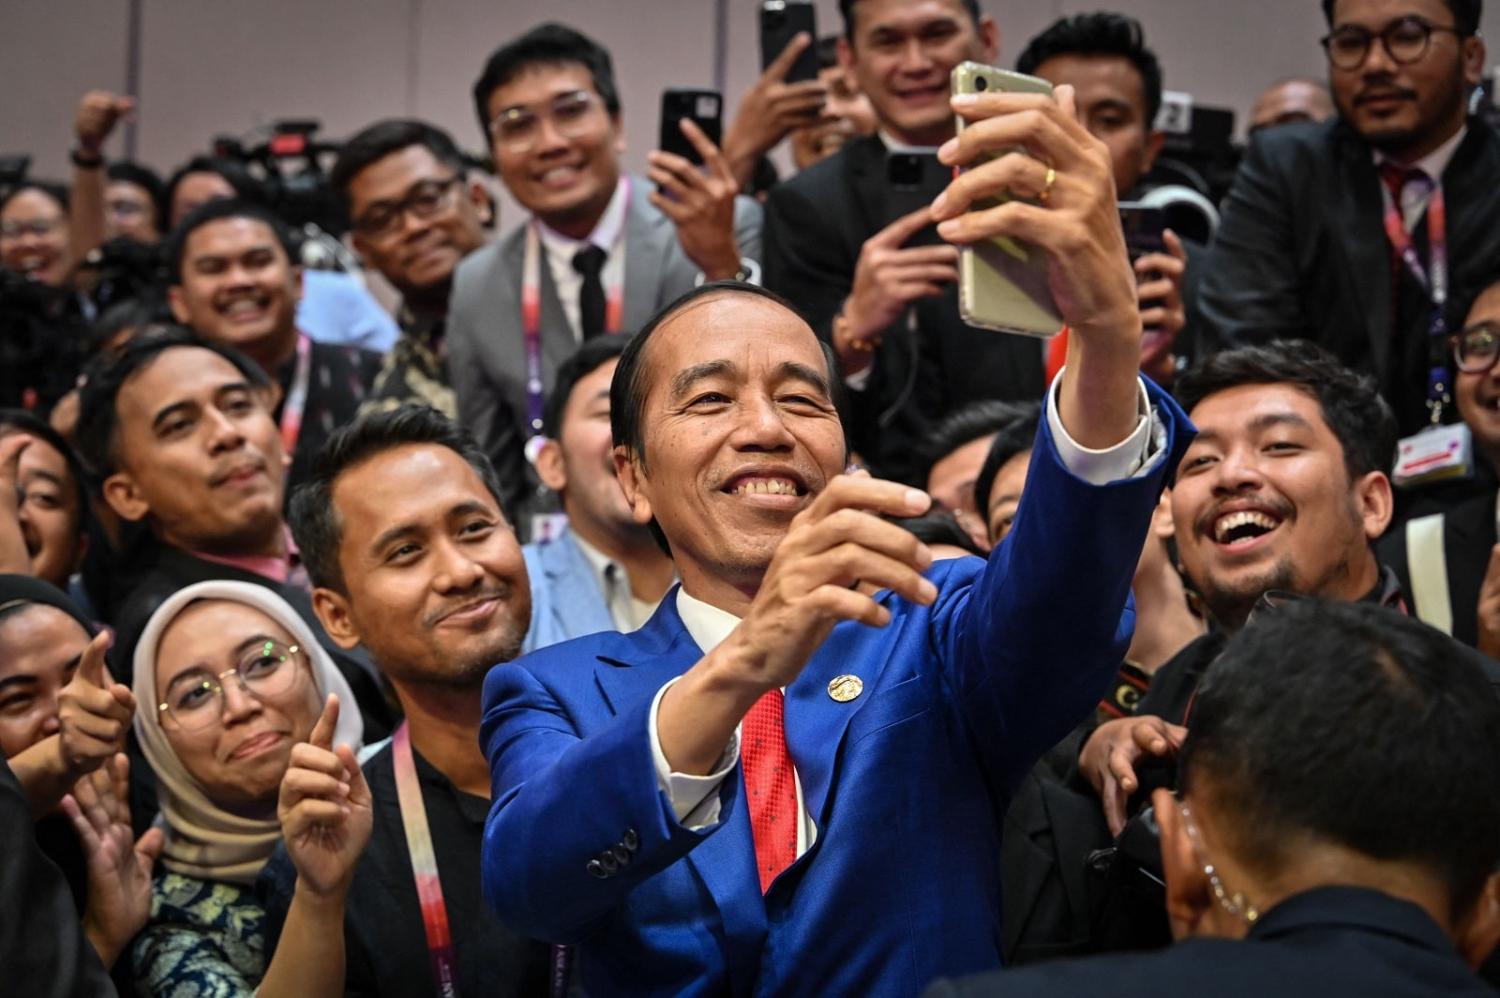 Indonesia's President Joko Widodo recently unveiled the country's preliminary long-term development plan, with direct reference to "influence" as a strategic objective (Adek Berry/AFP via Getty Images)